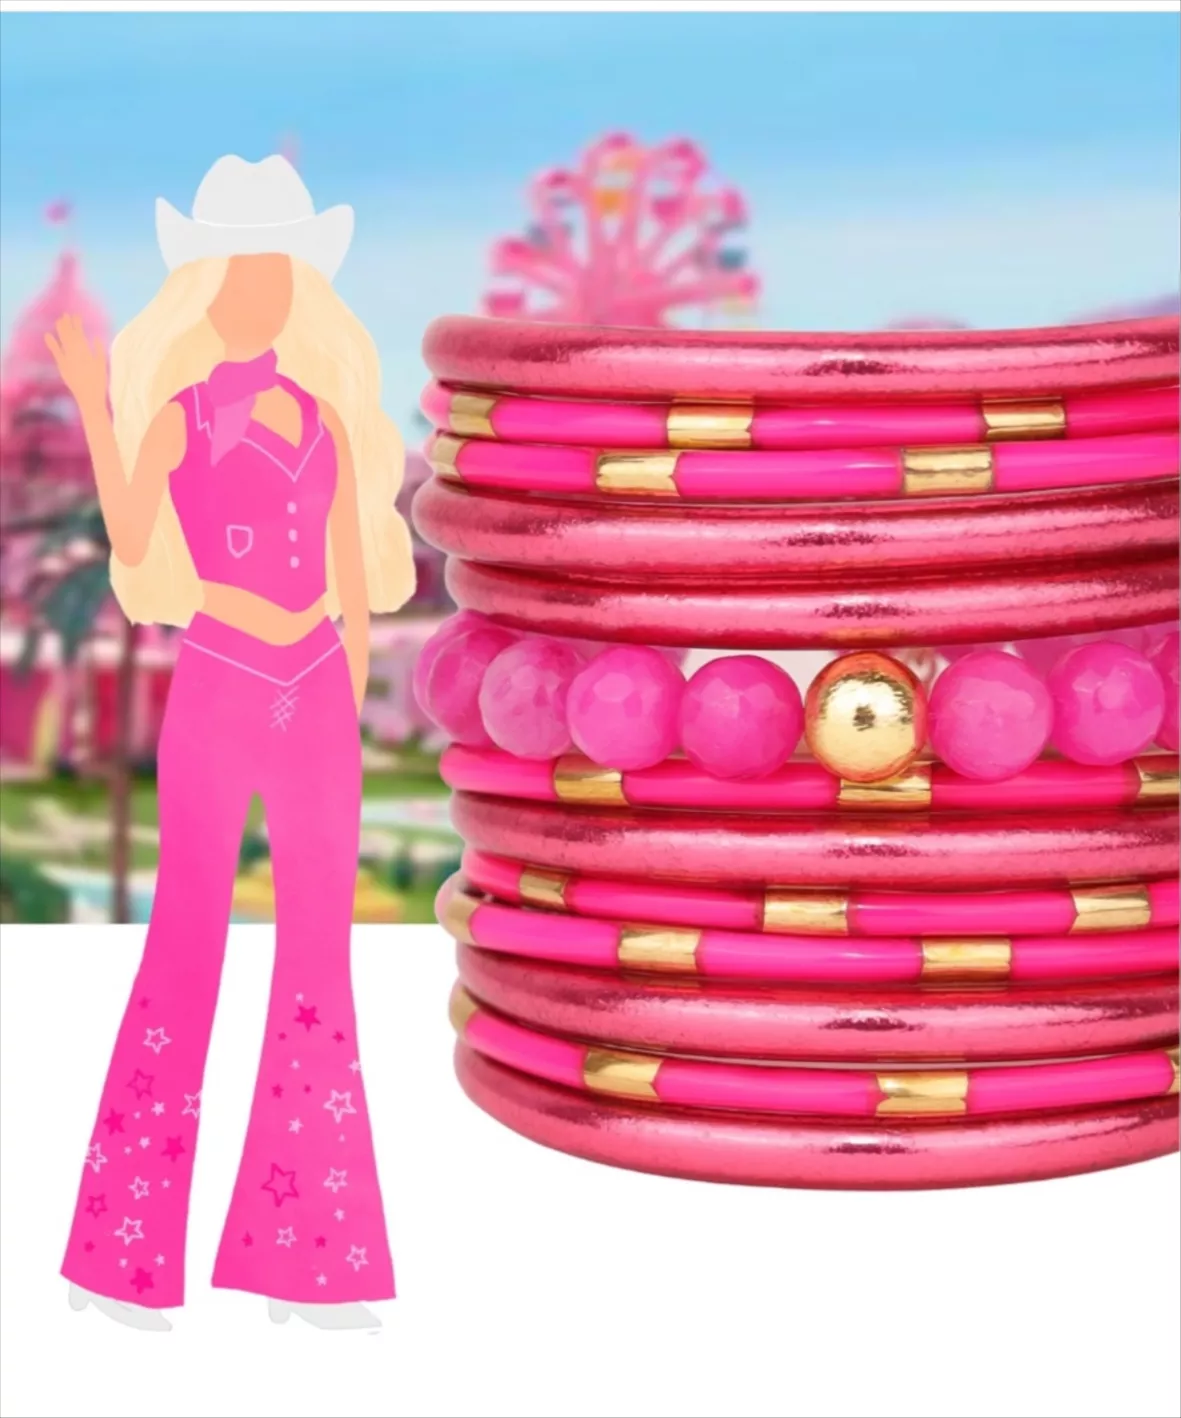 BuDhaGirl | All Weather Bangles Carousel Pink / Large